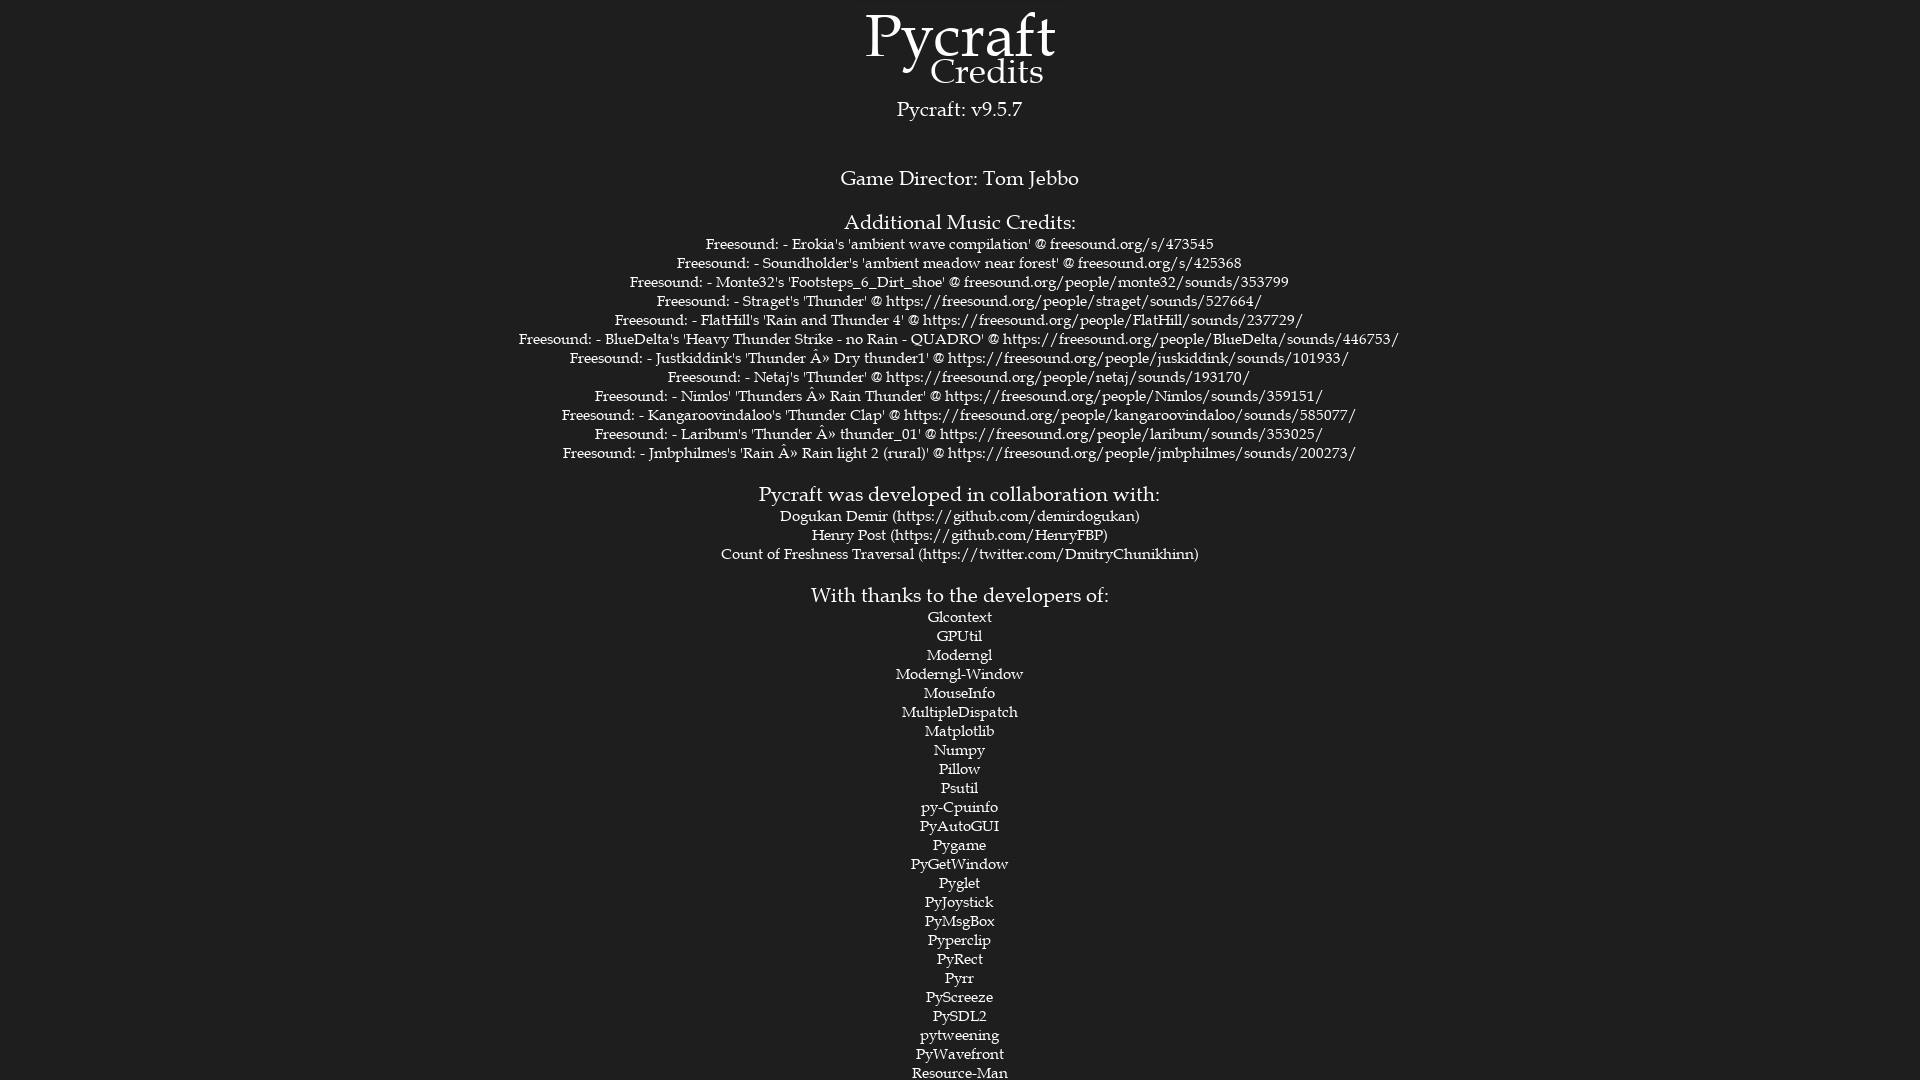 Pycraft's credits after the changes!